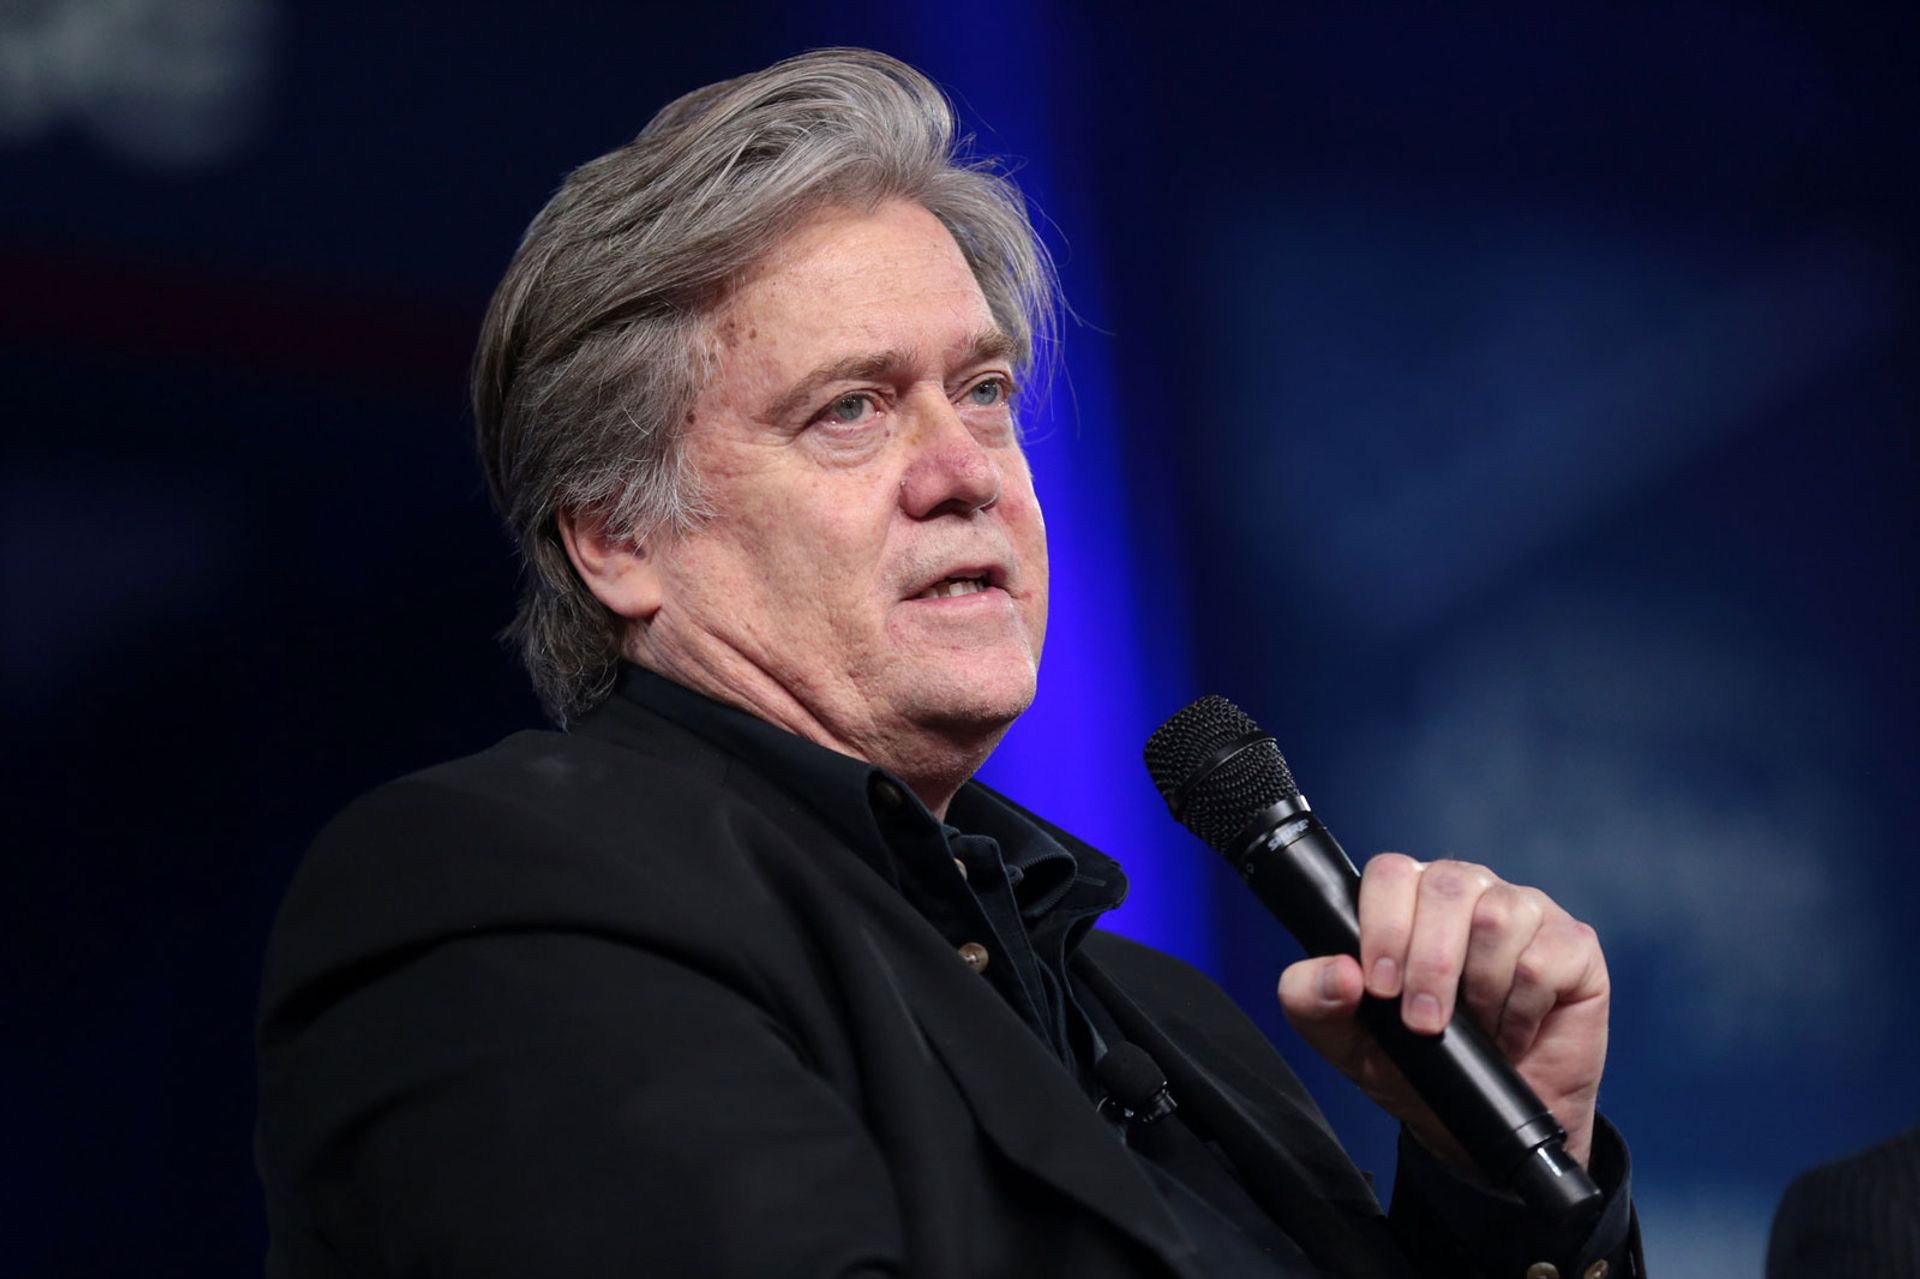 Steve Bannon is funding the Dignitatis Humanae Institute, a Catholic lobby group 